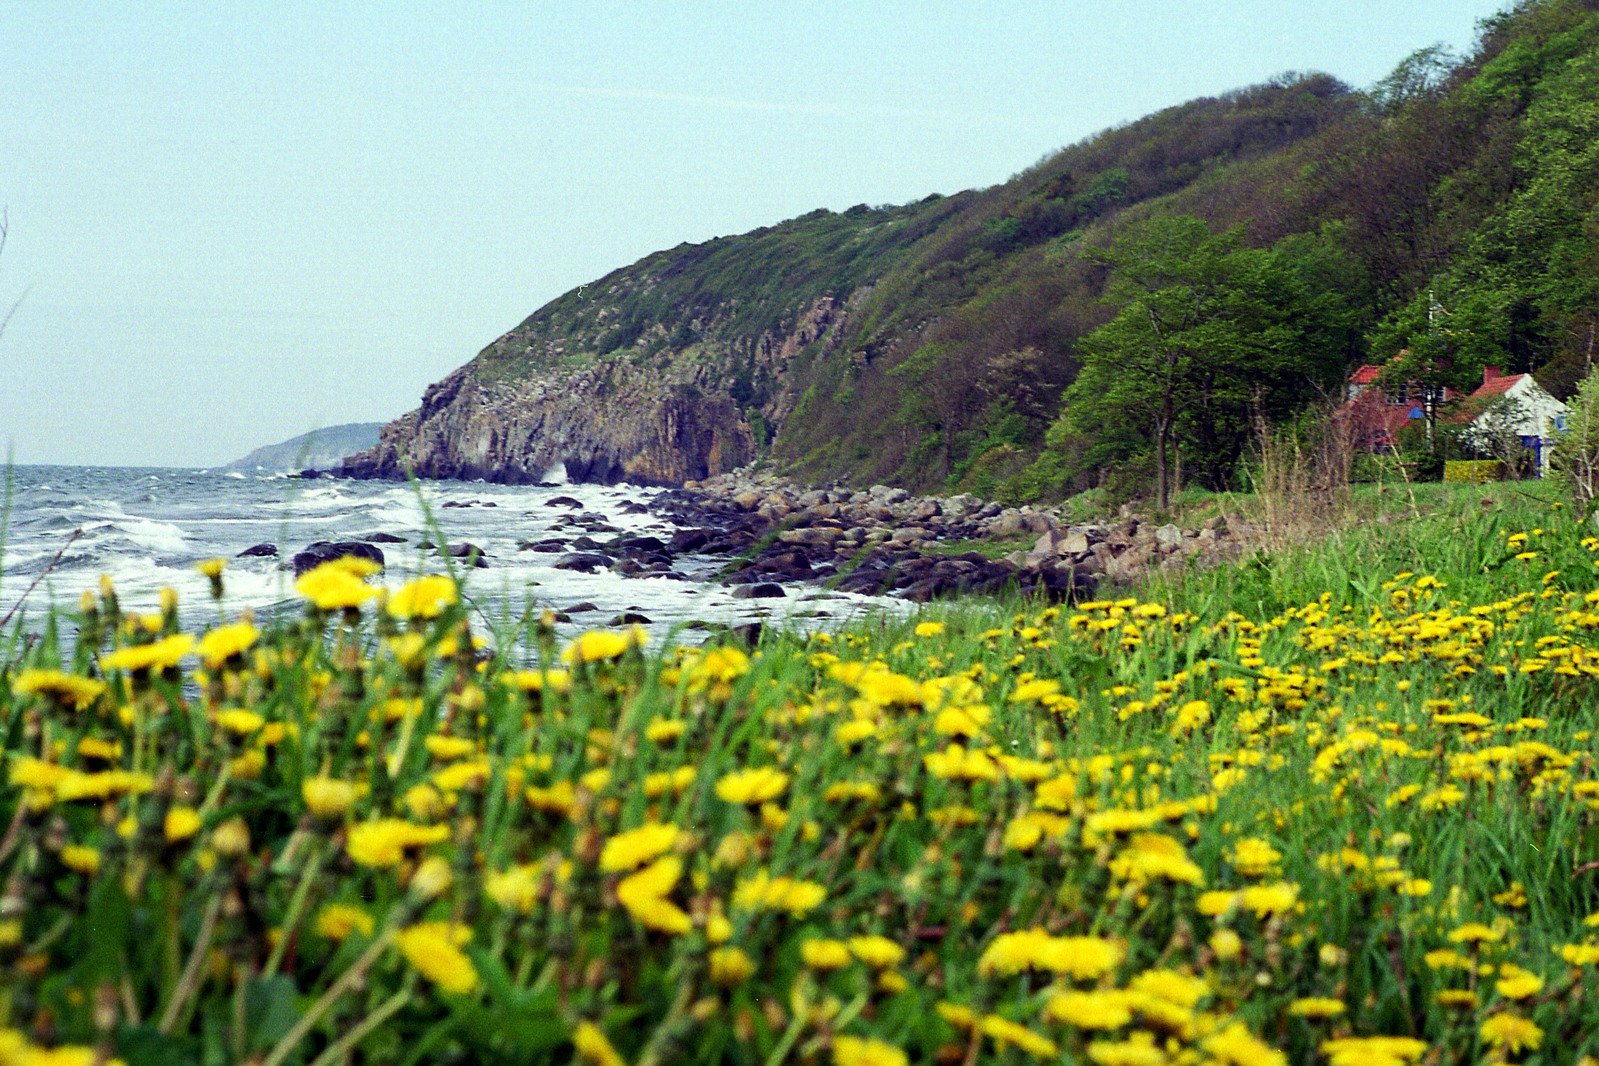 the view of the coast by some flowers and the ocean